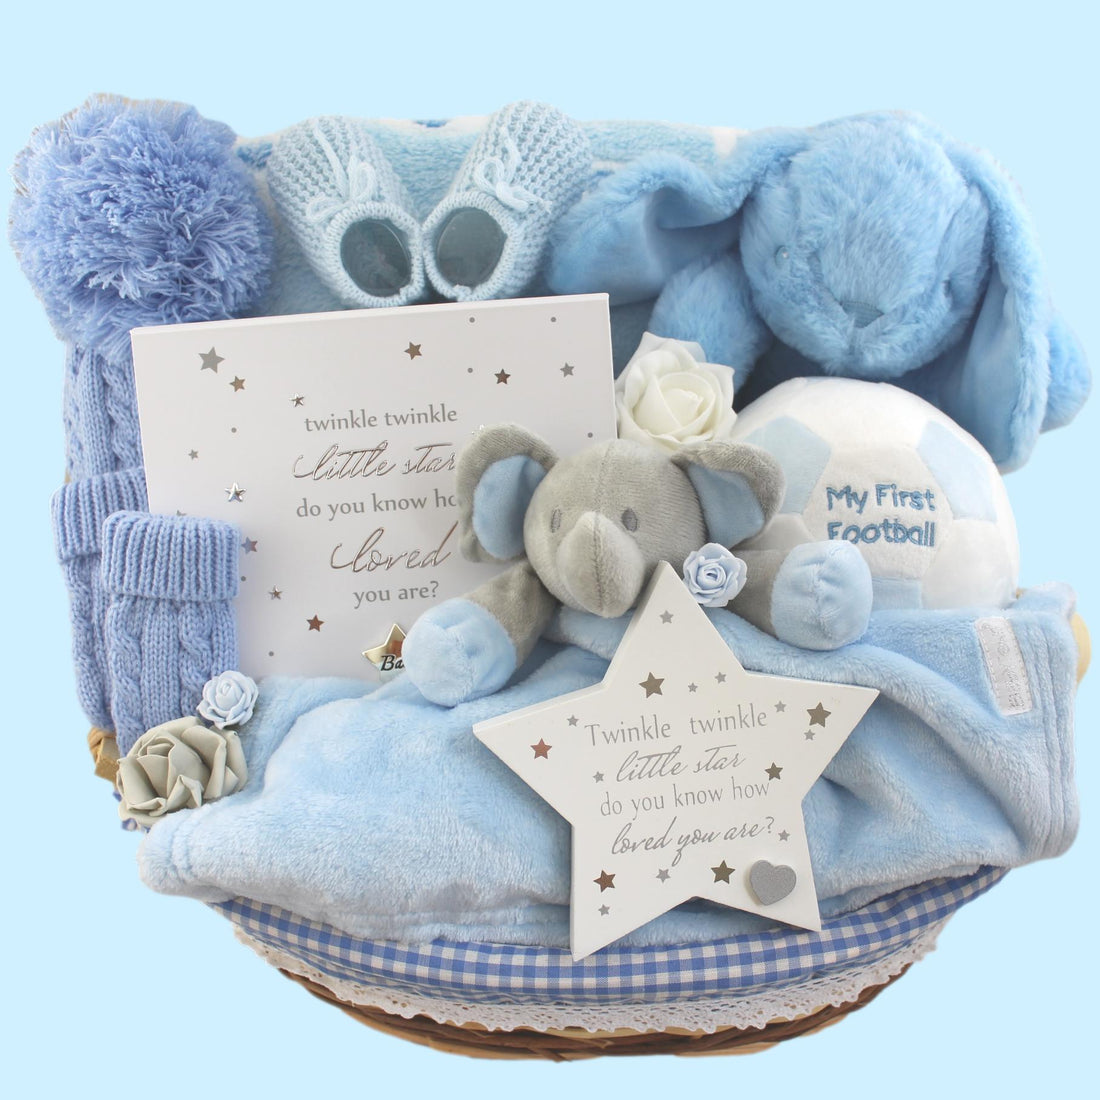 Buy our bath time baby basket at broadwaybasketeers.com